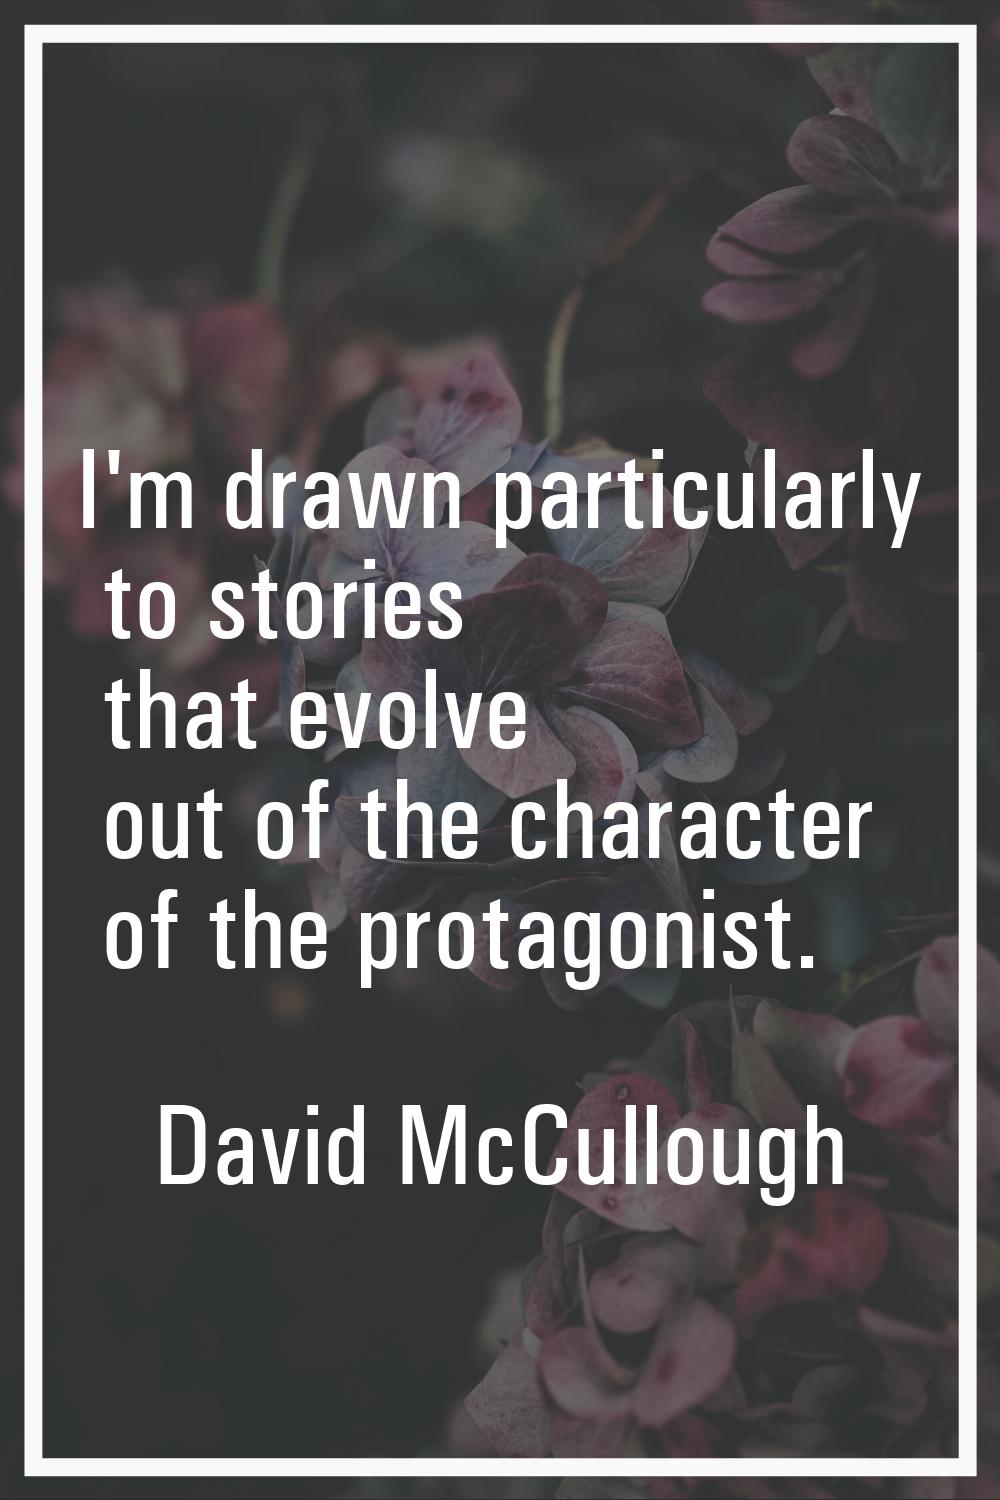 I'm drawn particularly to stories that evolve out of the character of the protagonist.